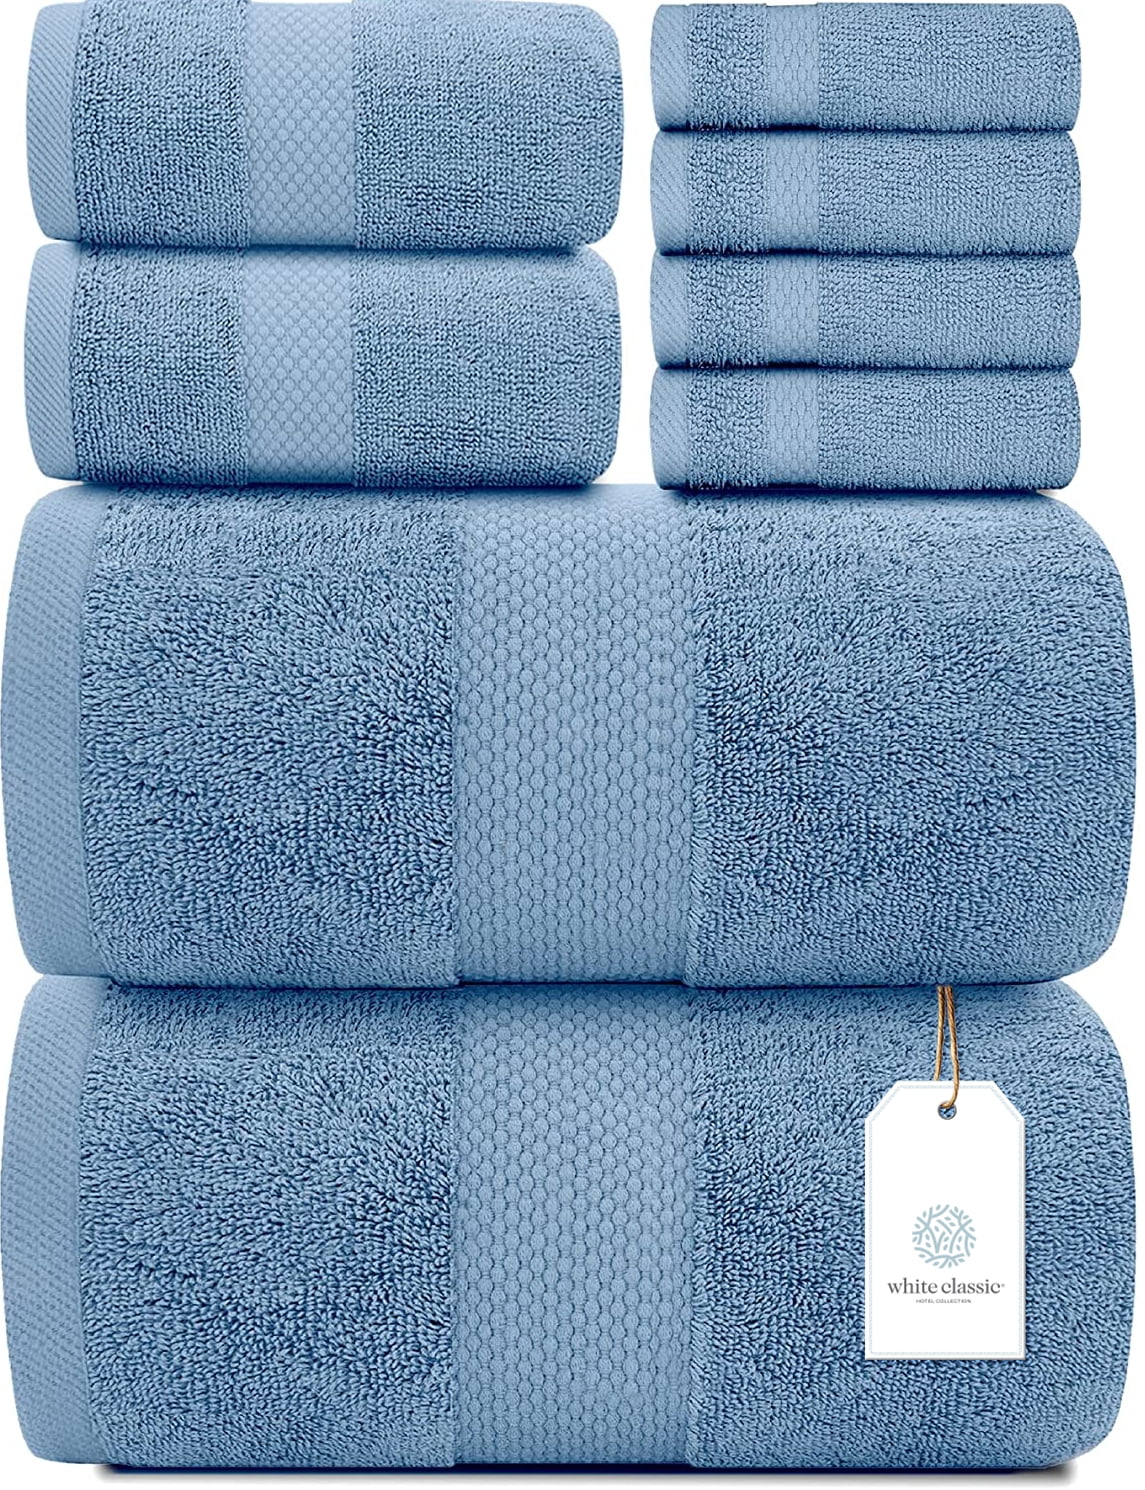 Hotel Balfour Collection White Waffle 100% Cotton 2 Bath 2 Hand Towels 4  Set New